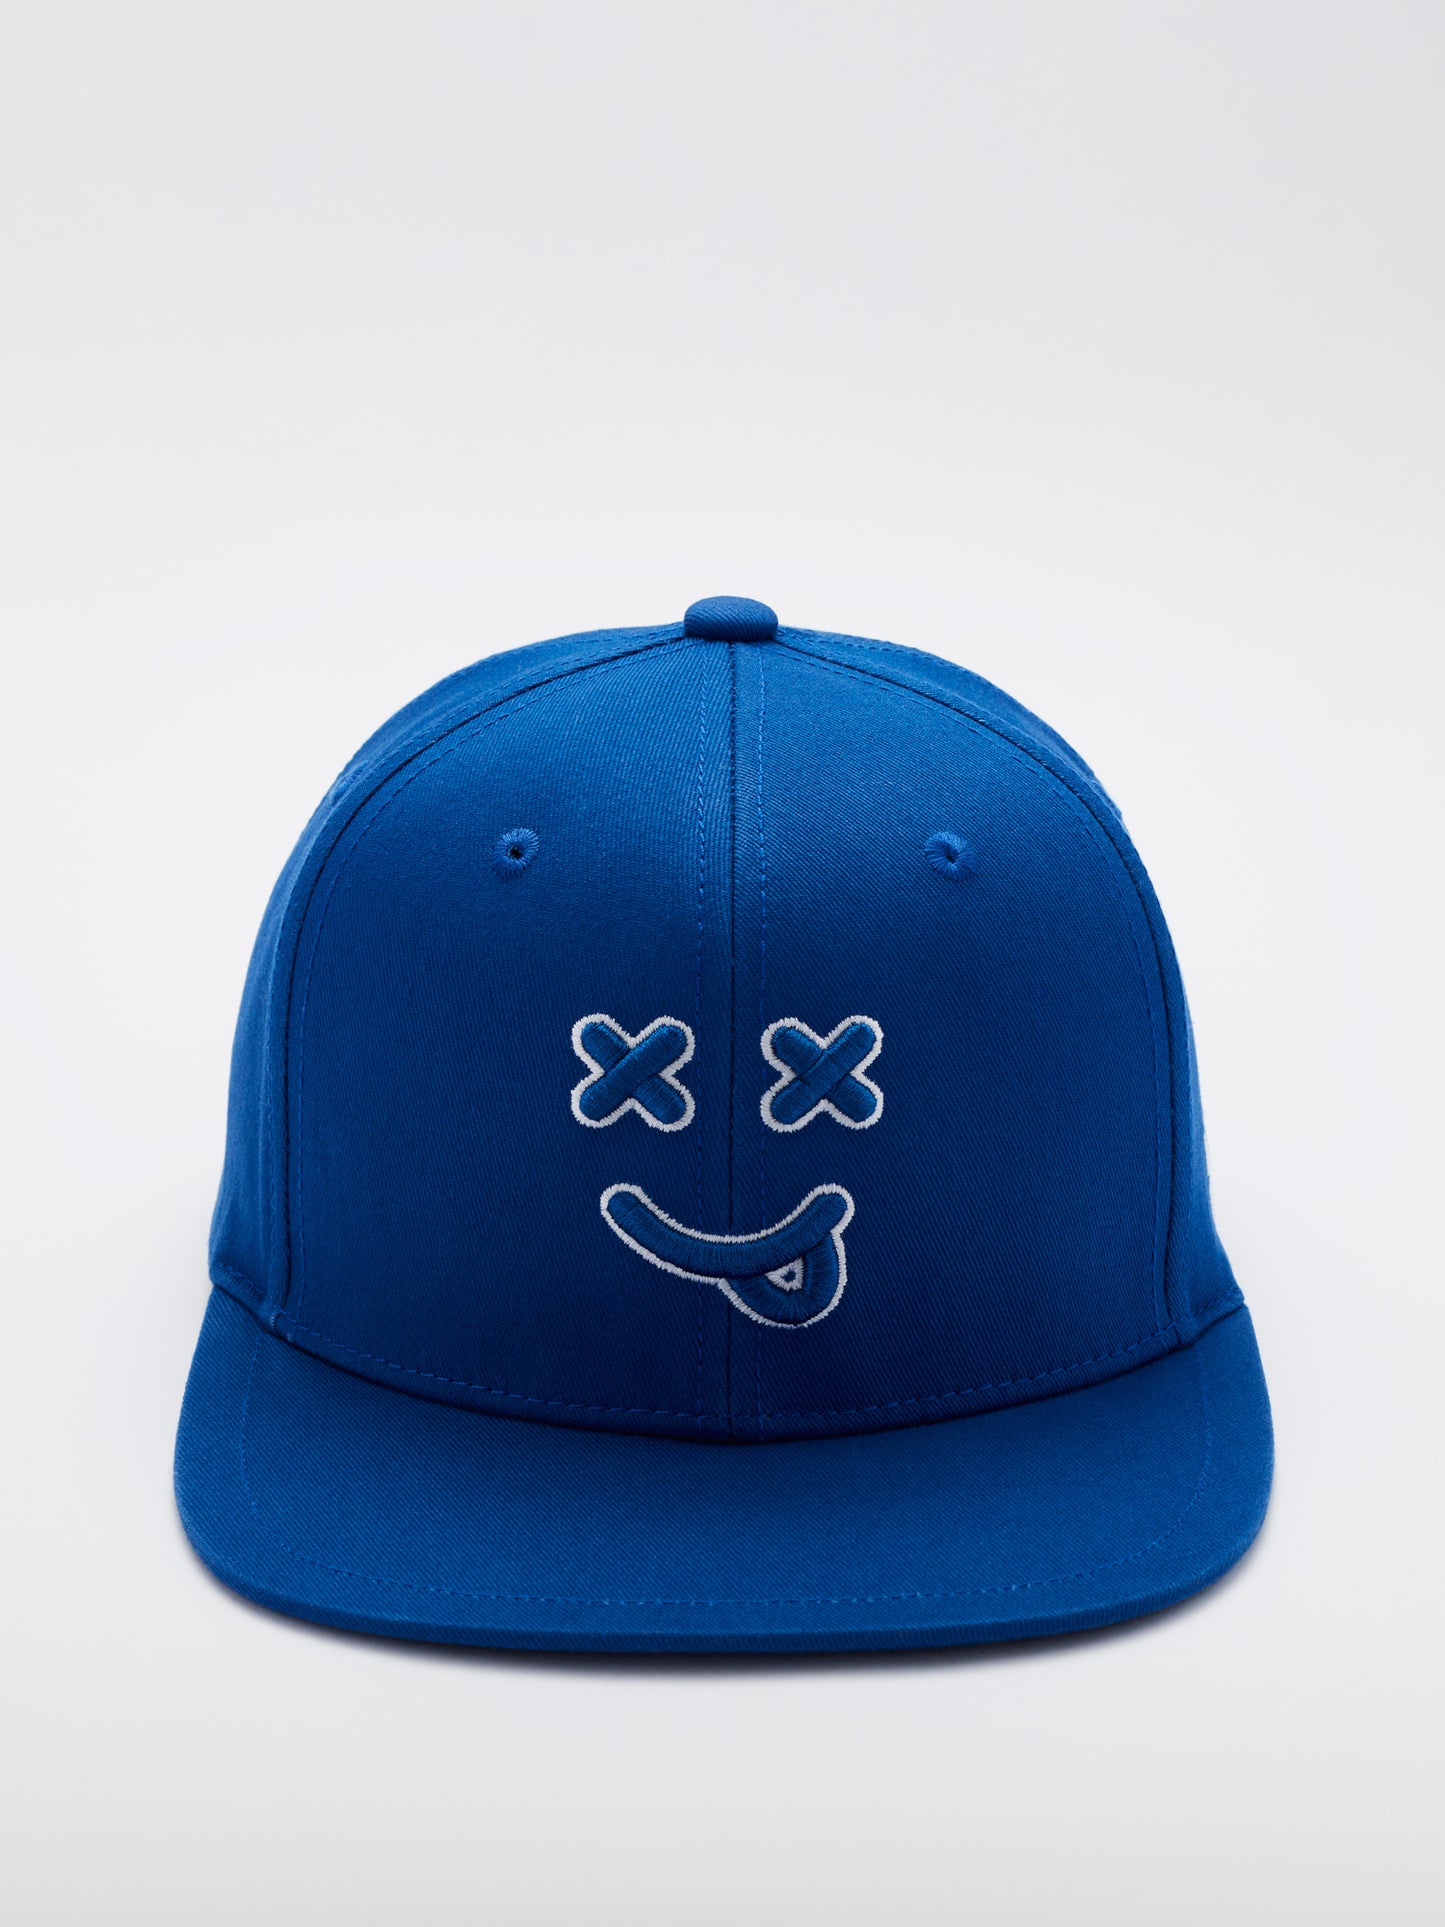 Load image into Gallery viewer, MOOD Caps - XX smiley face baseball cap flat brim front in blue color view
